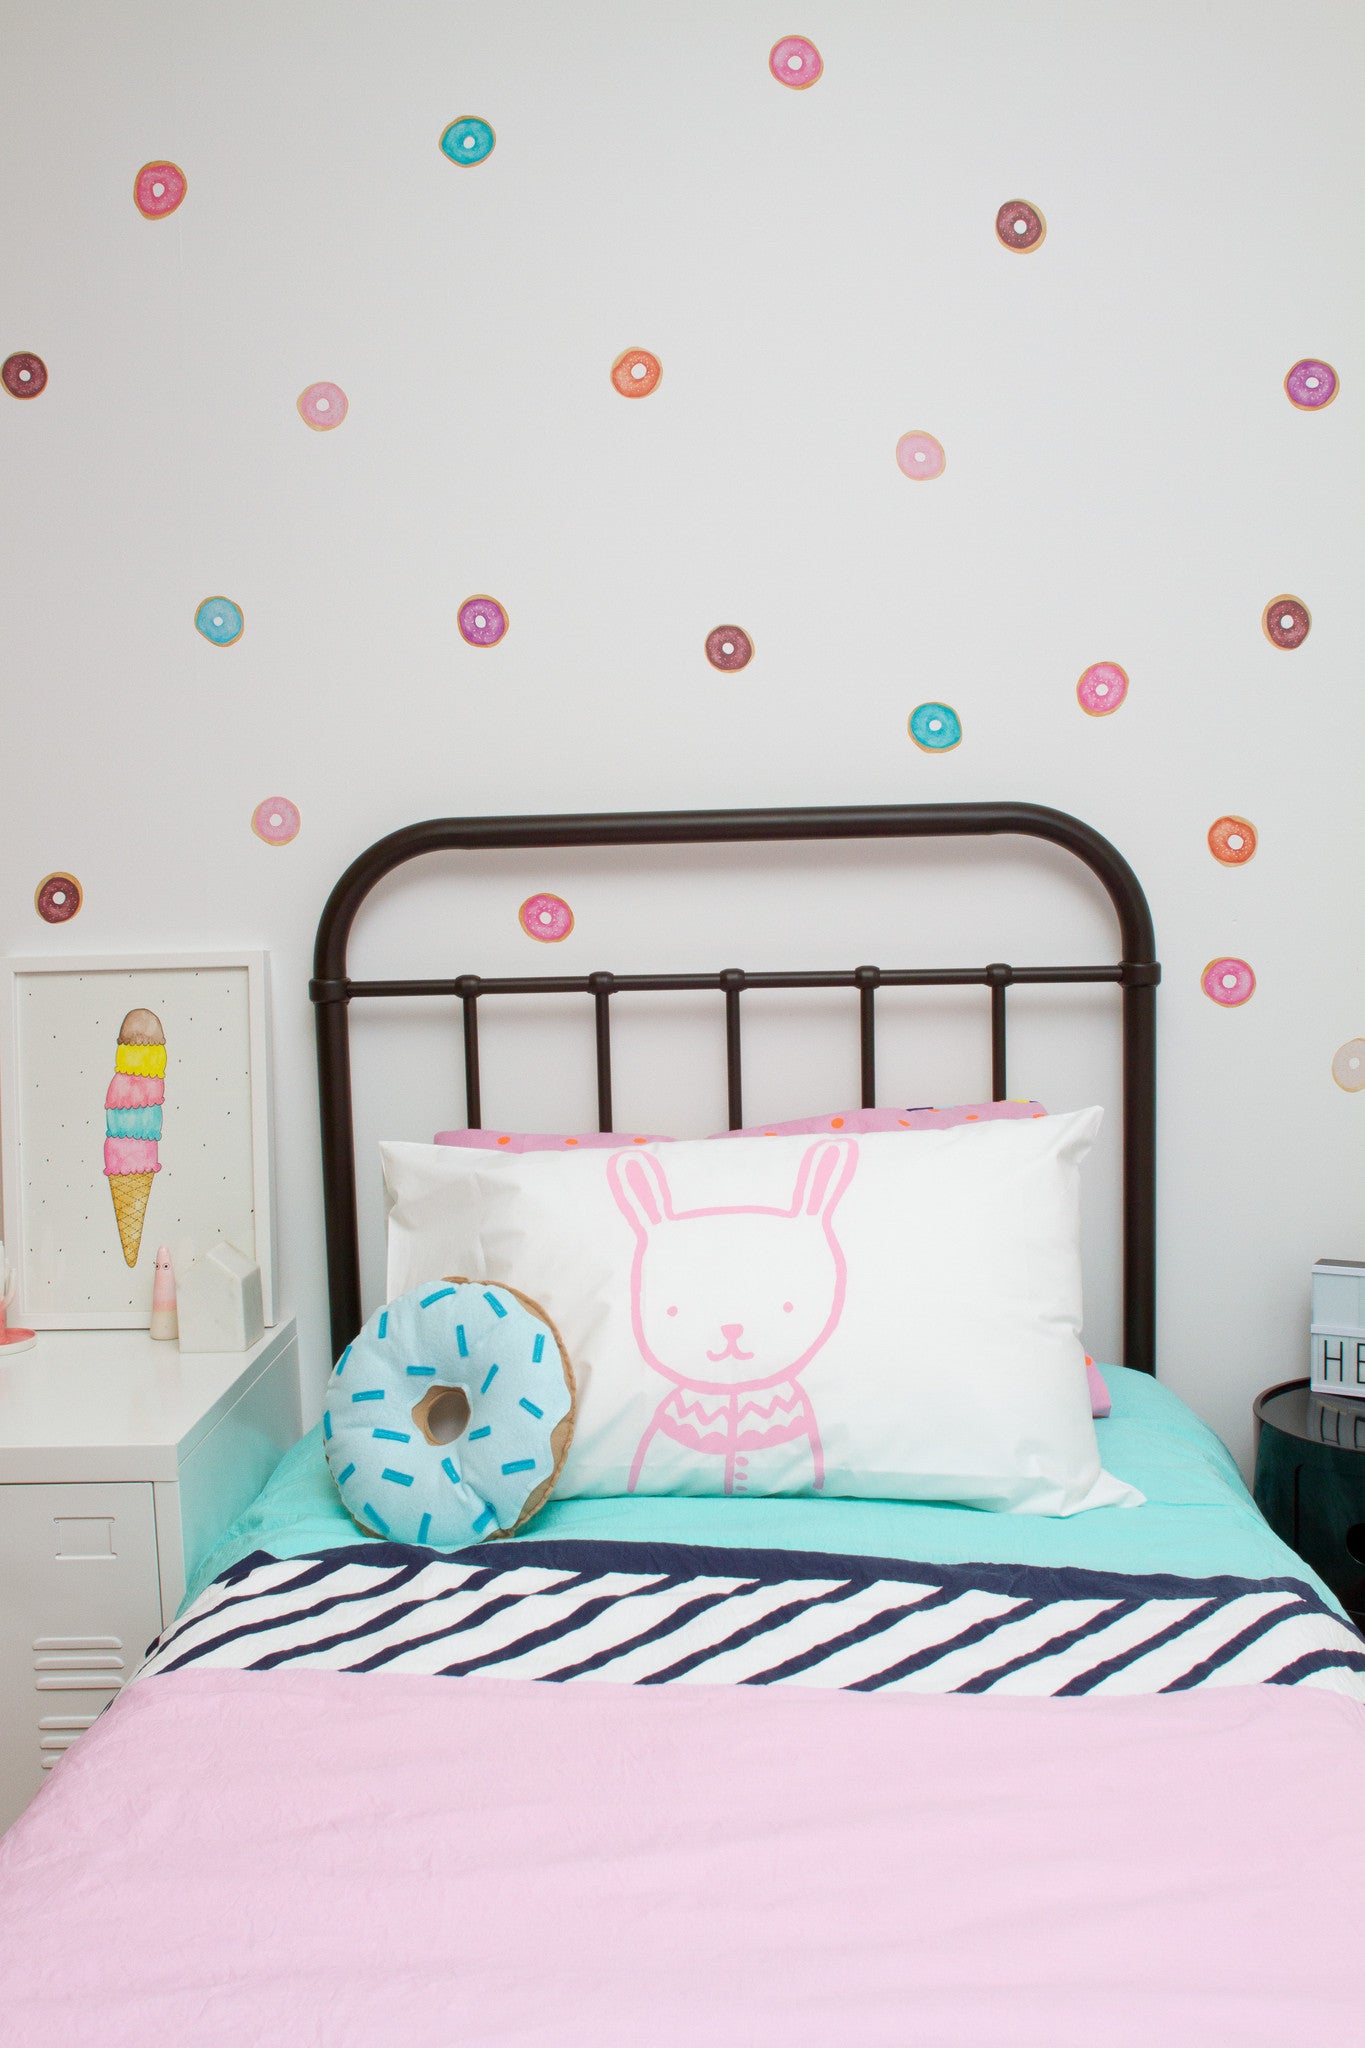 Donuts Wall Stickers - Wall decals - 100 Percent Heart 